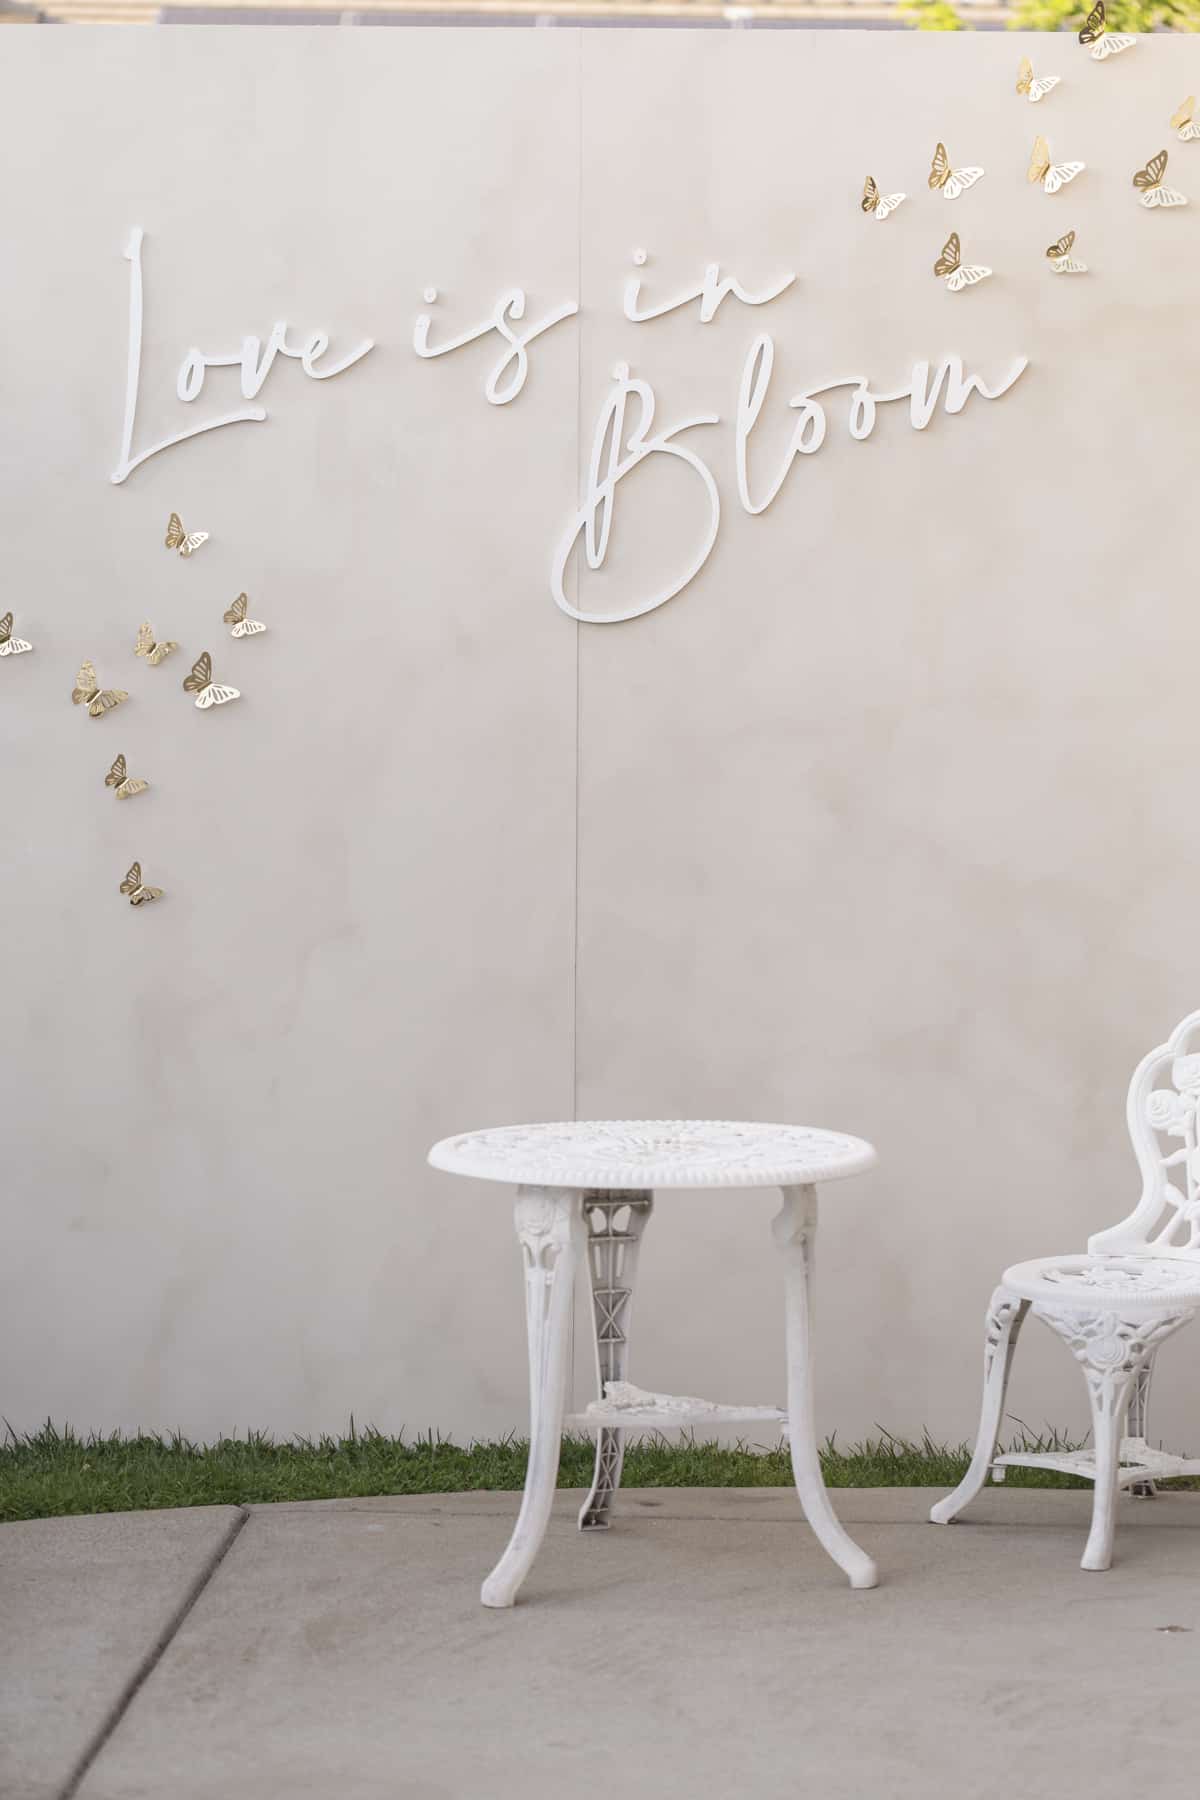 limestone backdrop with white cursive letters spelling "love is in bloom" with gold butterflies